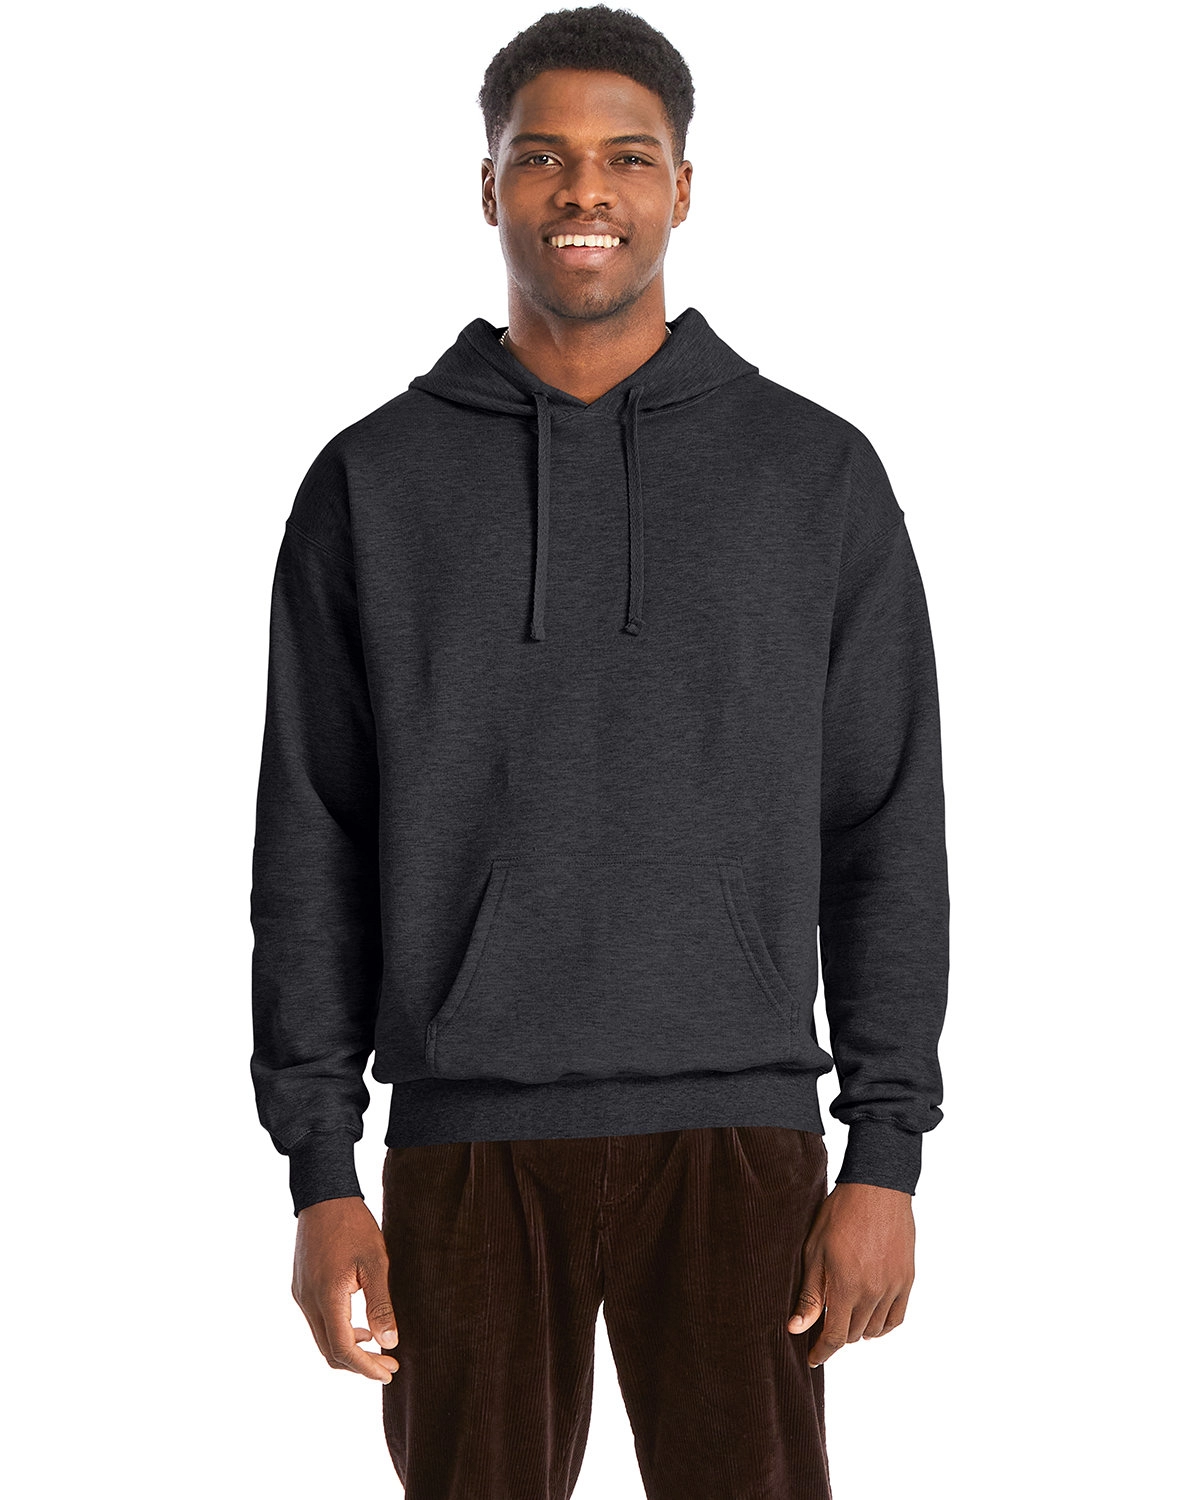 Hanes RS170, Adult Perfect Sweats Pullover Hooded Sweatshirt